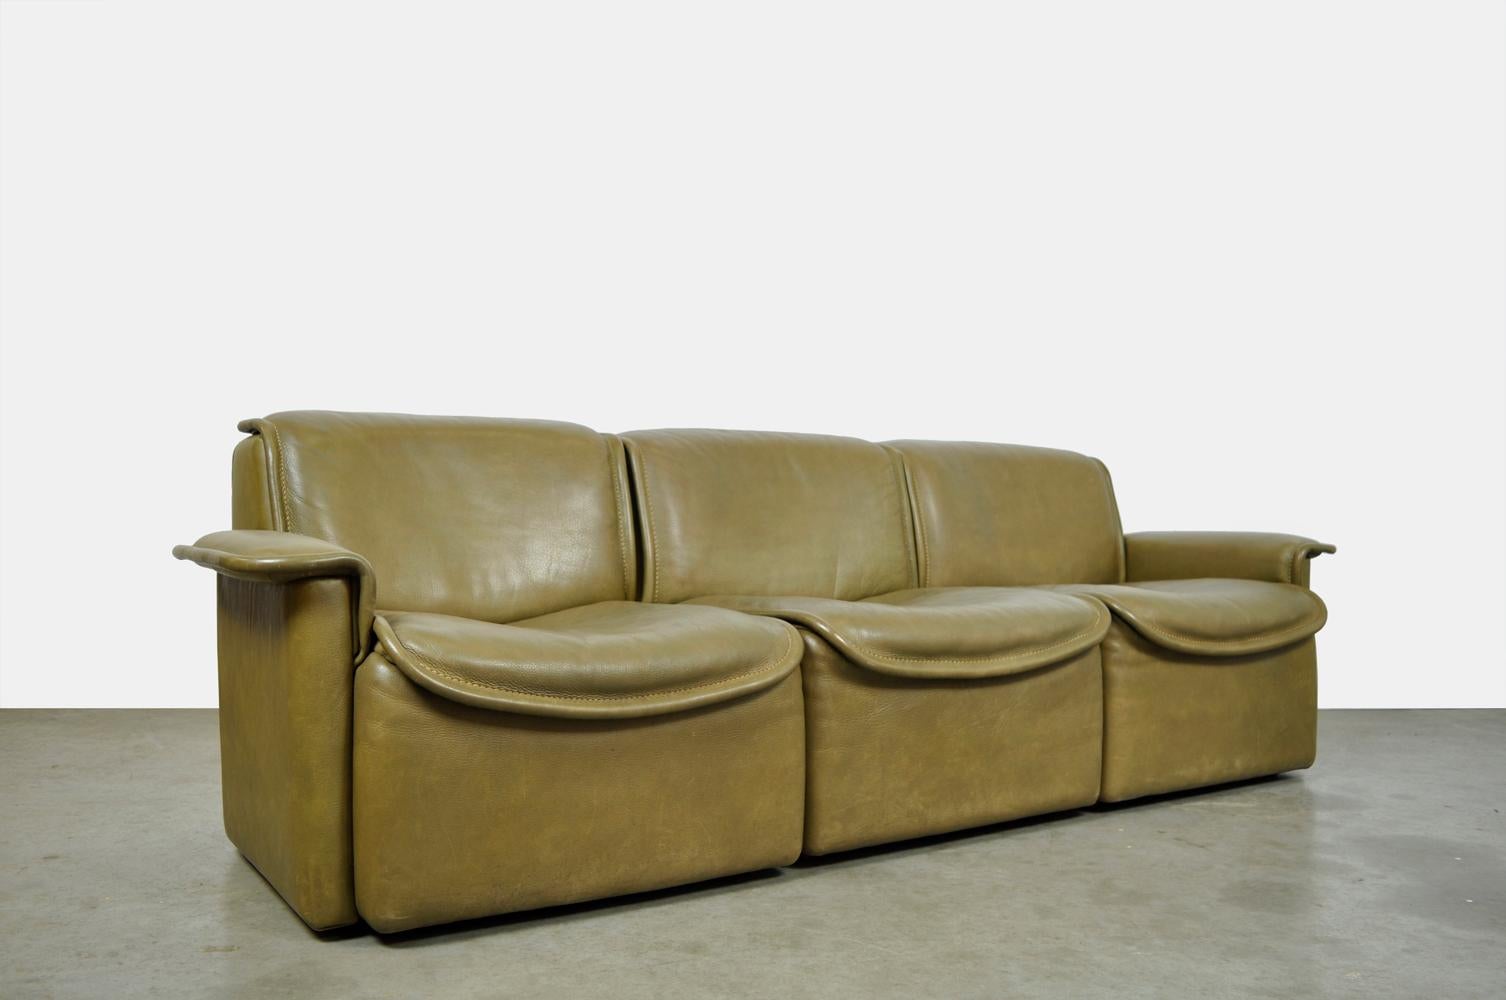 Original and rare 3-seater buffalo leather sofa DS-12 produced by De Sede Switzerland, 1970s. The 3-person vintage sofa consists of three separate elements and is covered with thick olive green saddle-stitched leather. Original sofa in a special